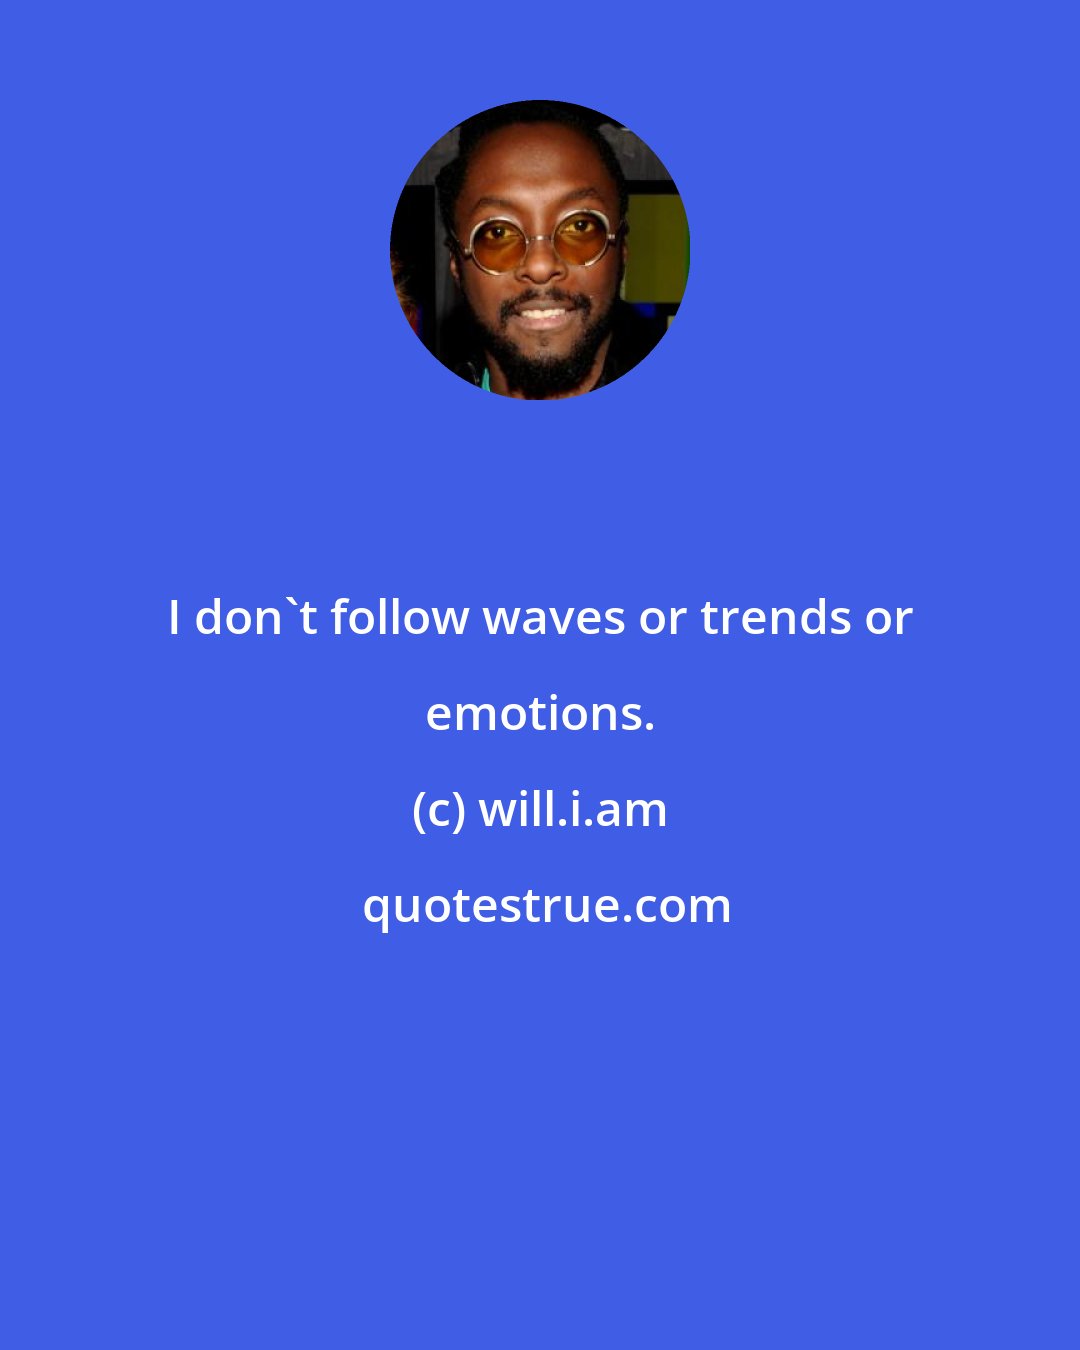 will.i.am: I don't follow waves or trends or emotions.